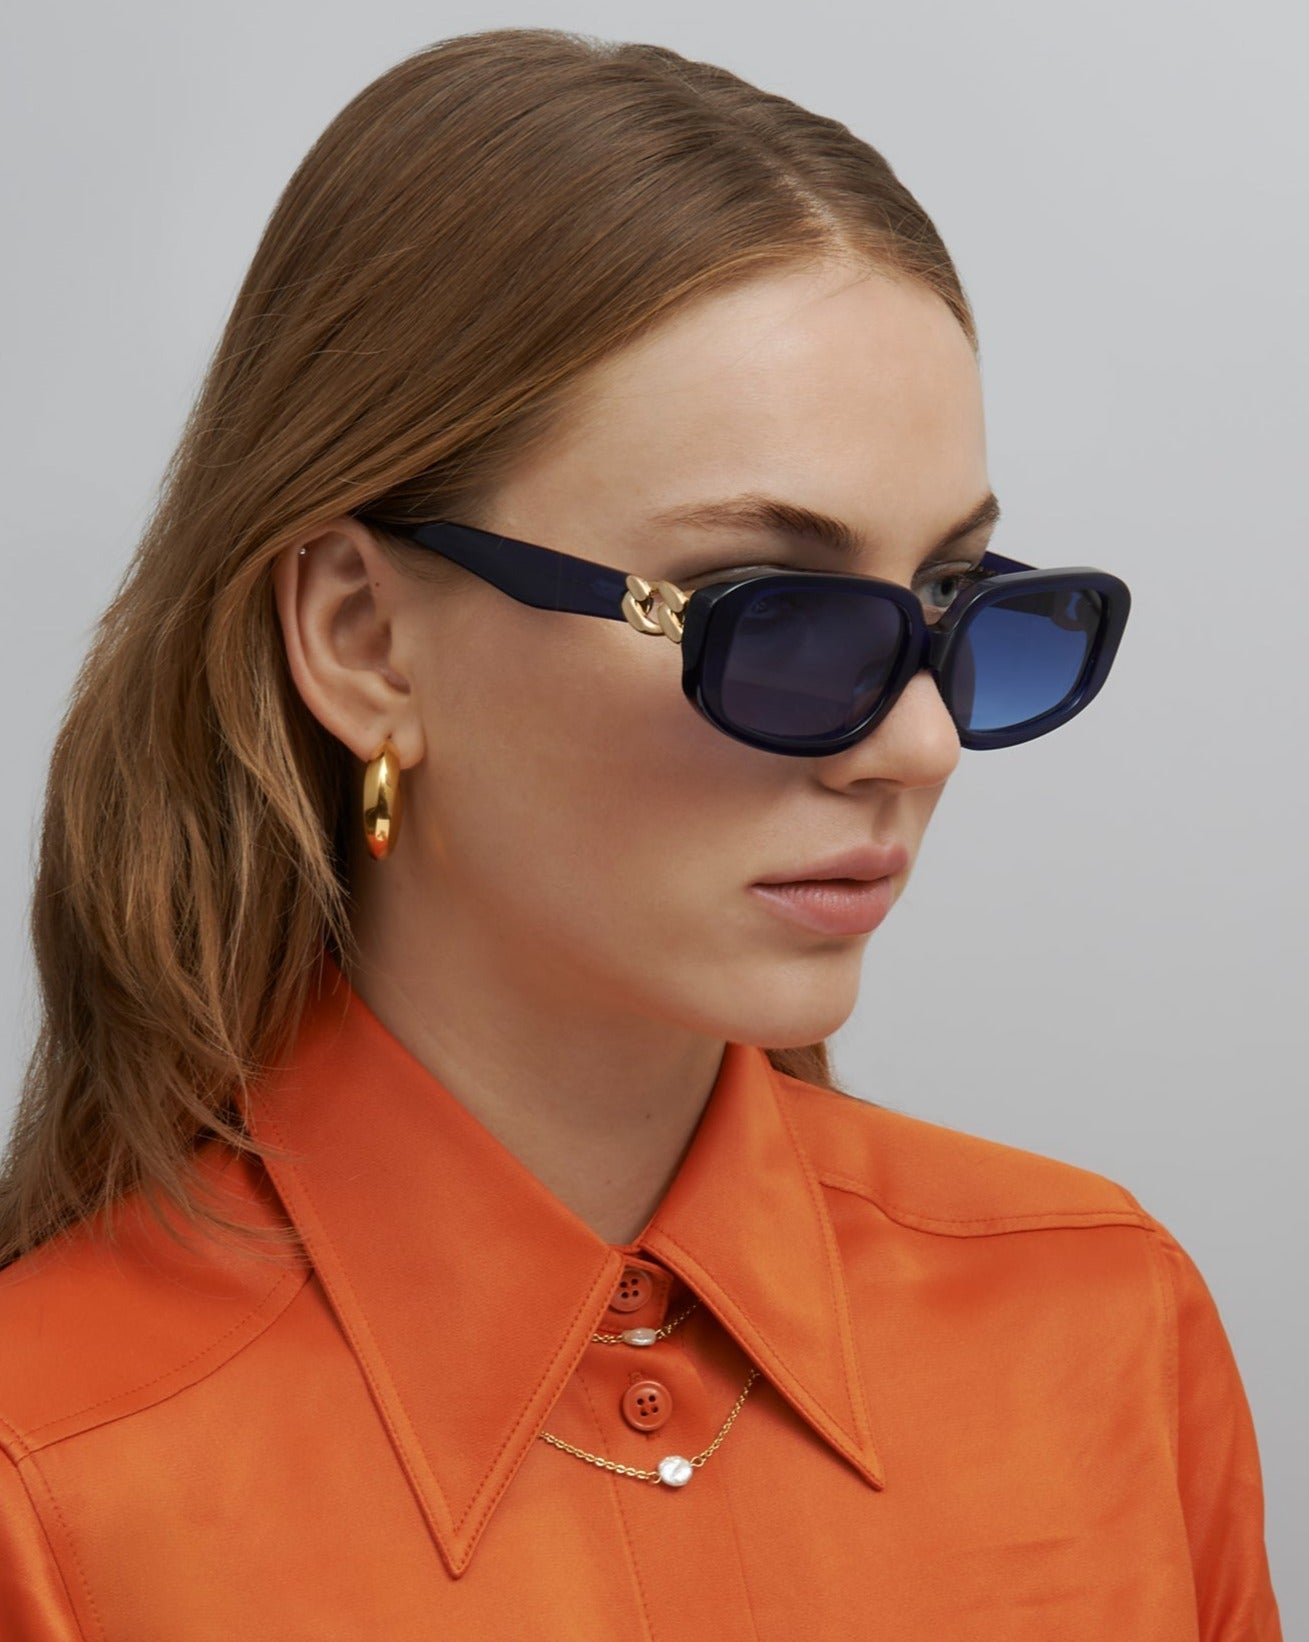 An image of a woman with Auburn hair wearing the Bolt sunglasses in Navy with an orange shirt and gold hoop earrings. 